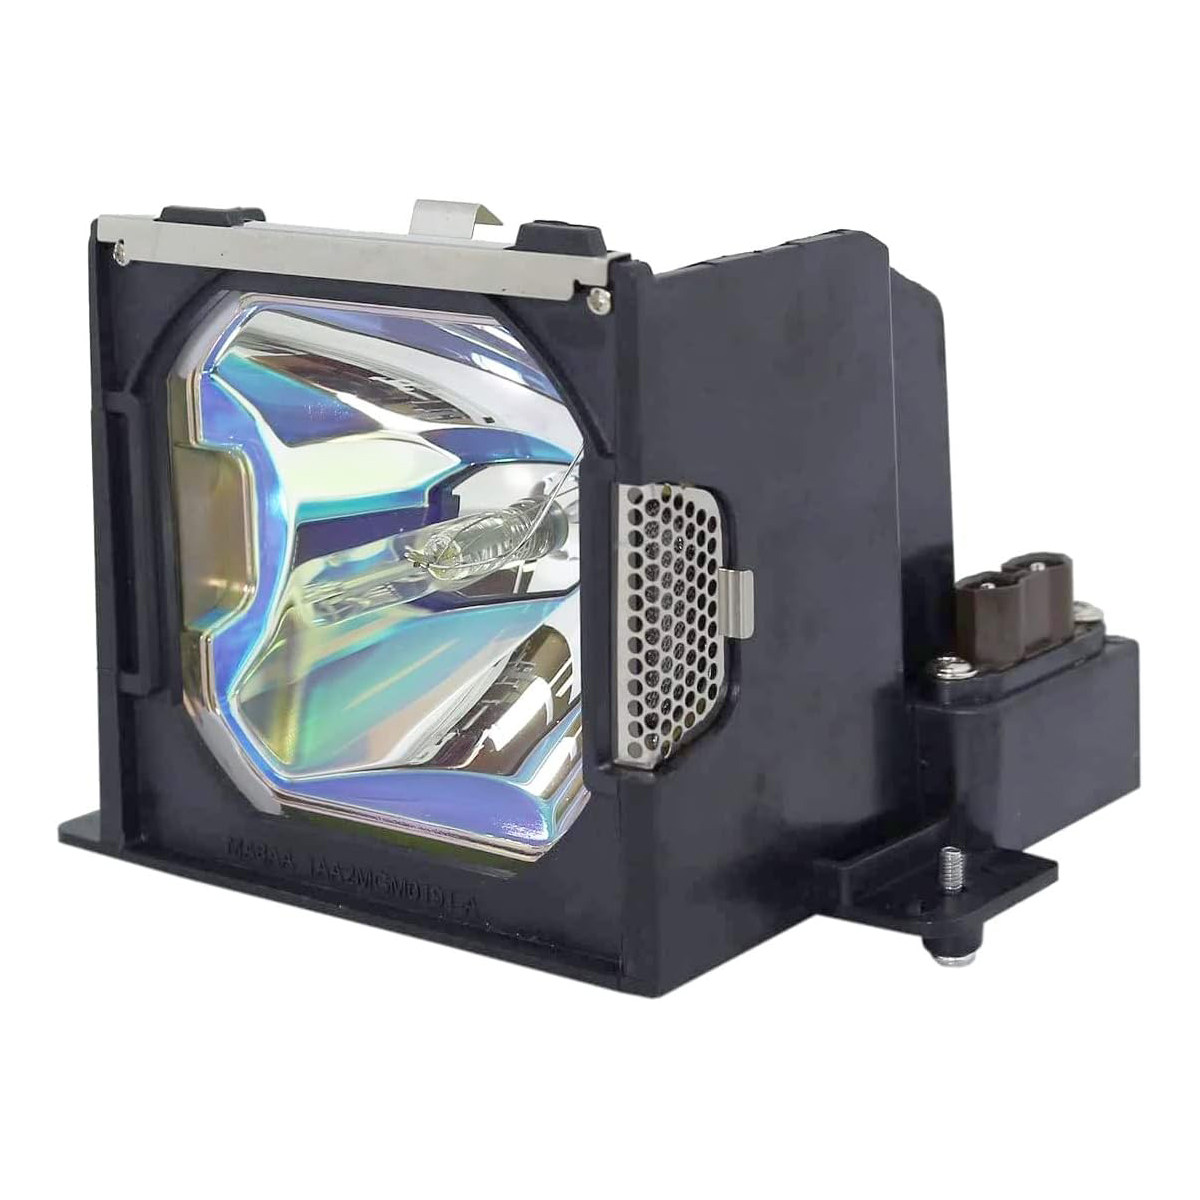 Replacement Projector lamp POA-LMP98 For Sanyo PLV-80 PLV-80L